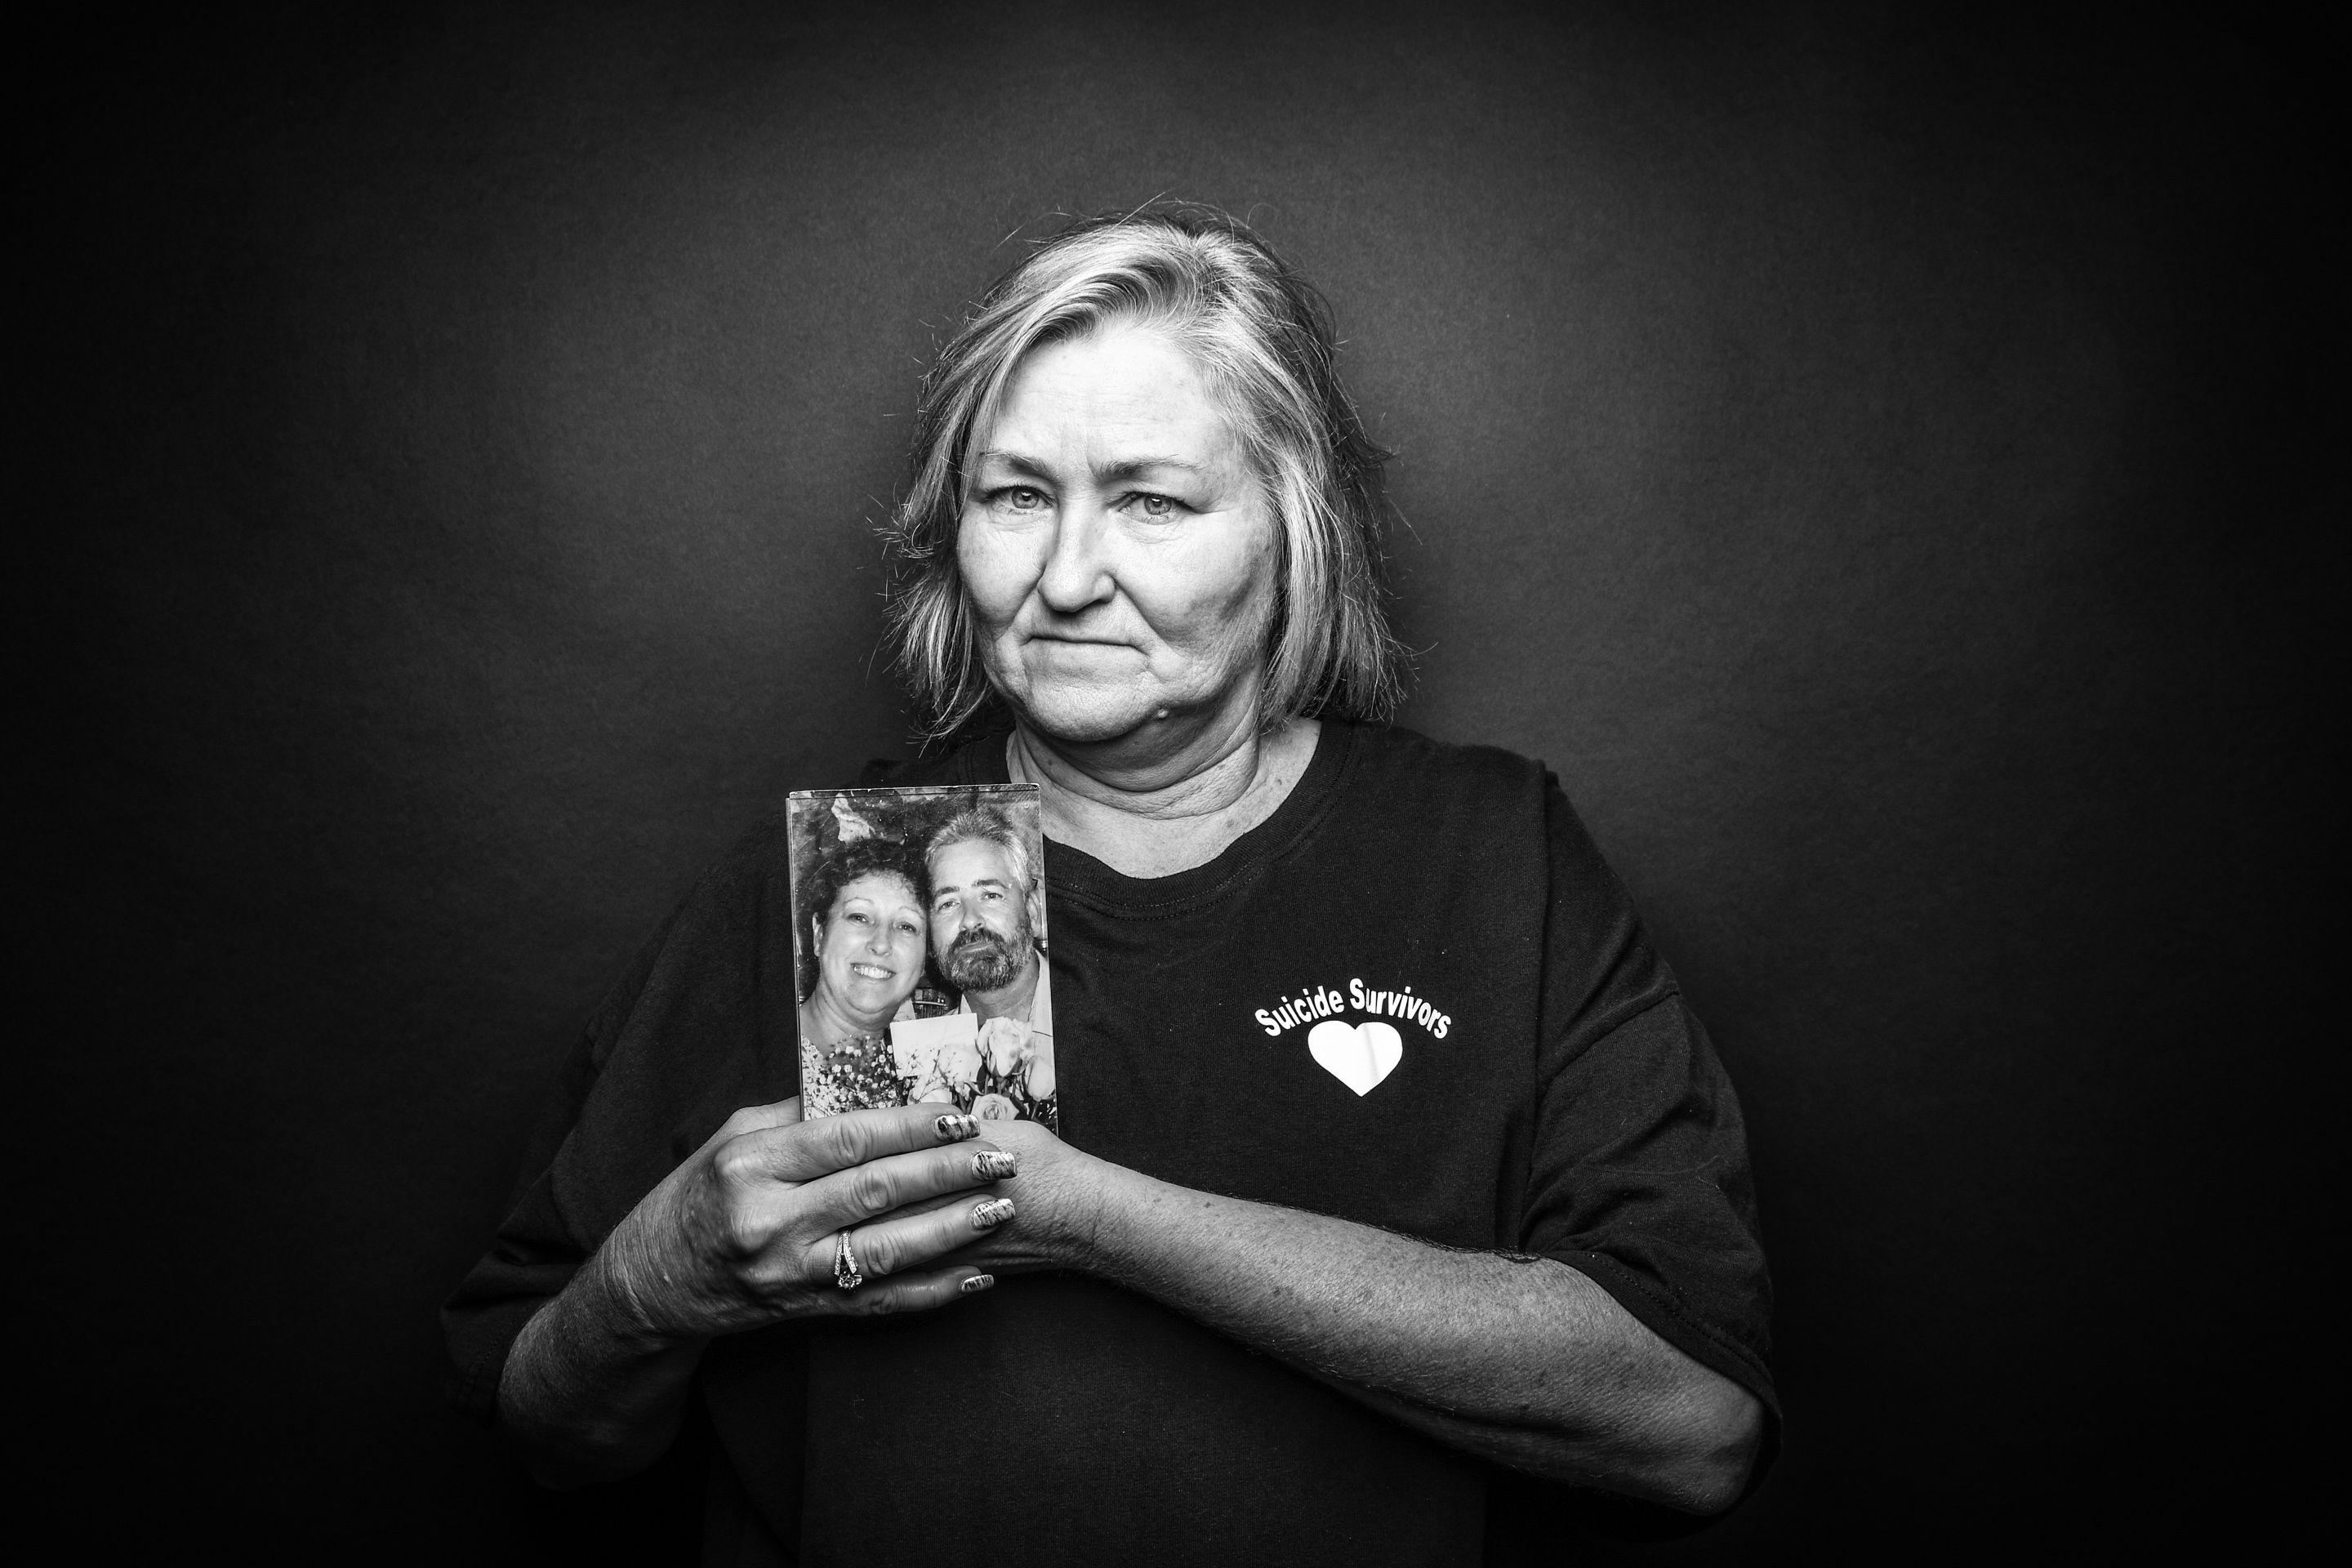 Cheri Jenkins, East Moline, holds a photo of her mother and stepfather, who died by suicide in Florida, within two weeks of each other in 2011.